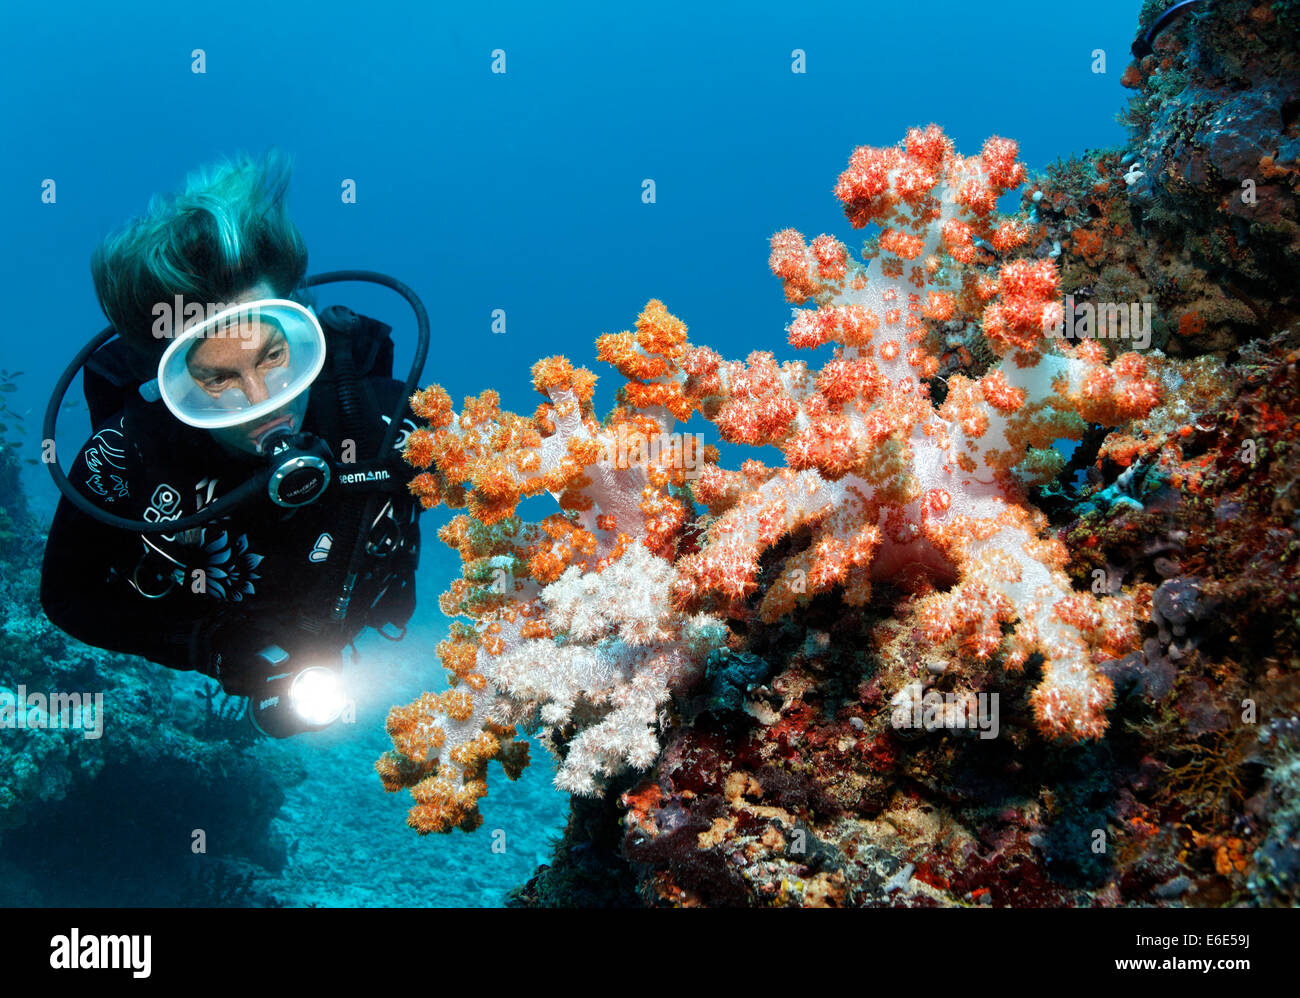 Scuba diver looking at Klunzinger's Soft Coral (Dendronephthya klunzingeri) at a coral reef, Embudu Channel, Indian Ocean Stock Photo